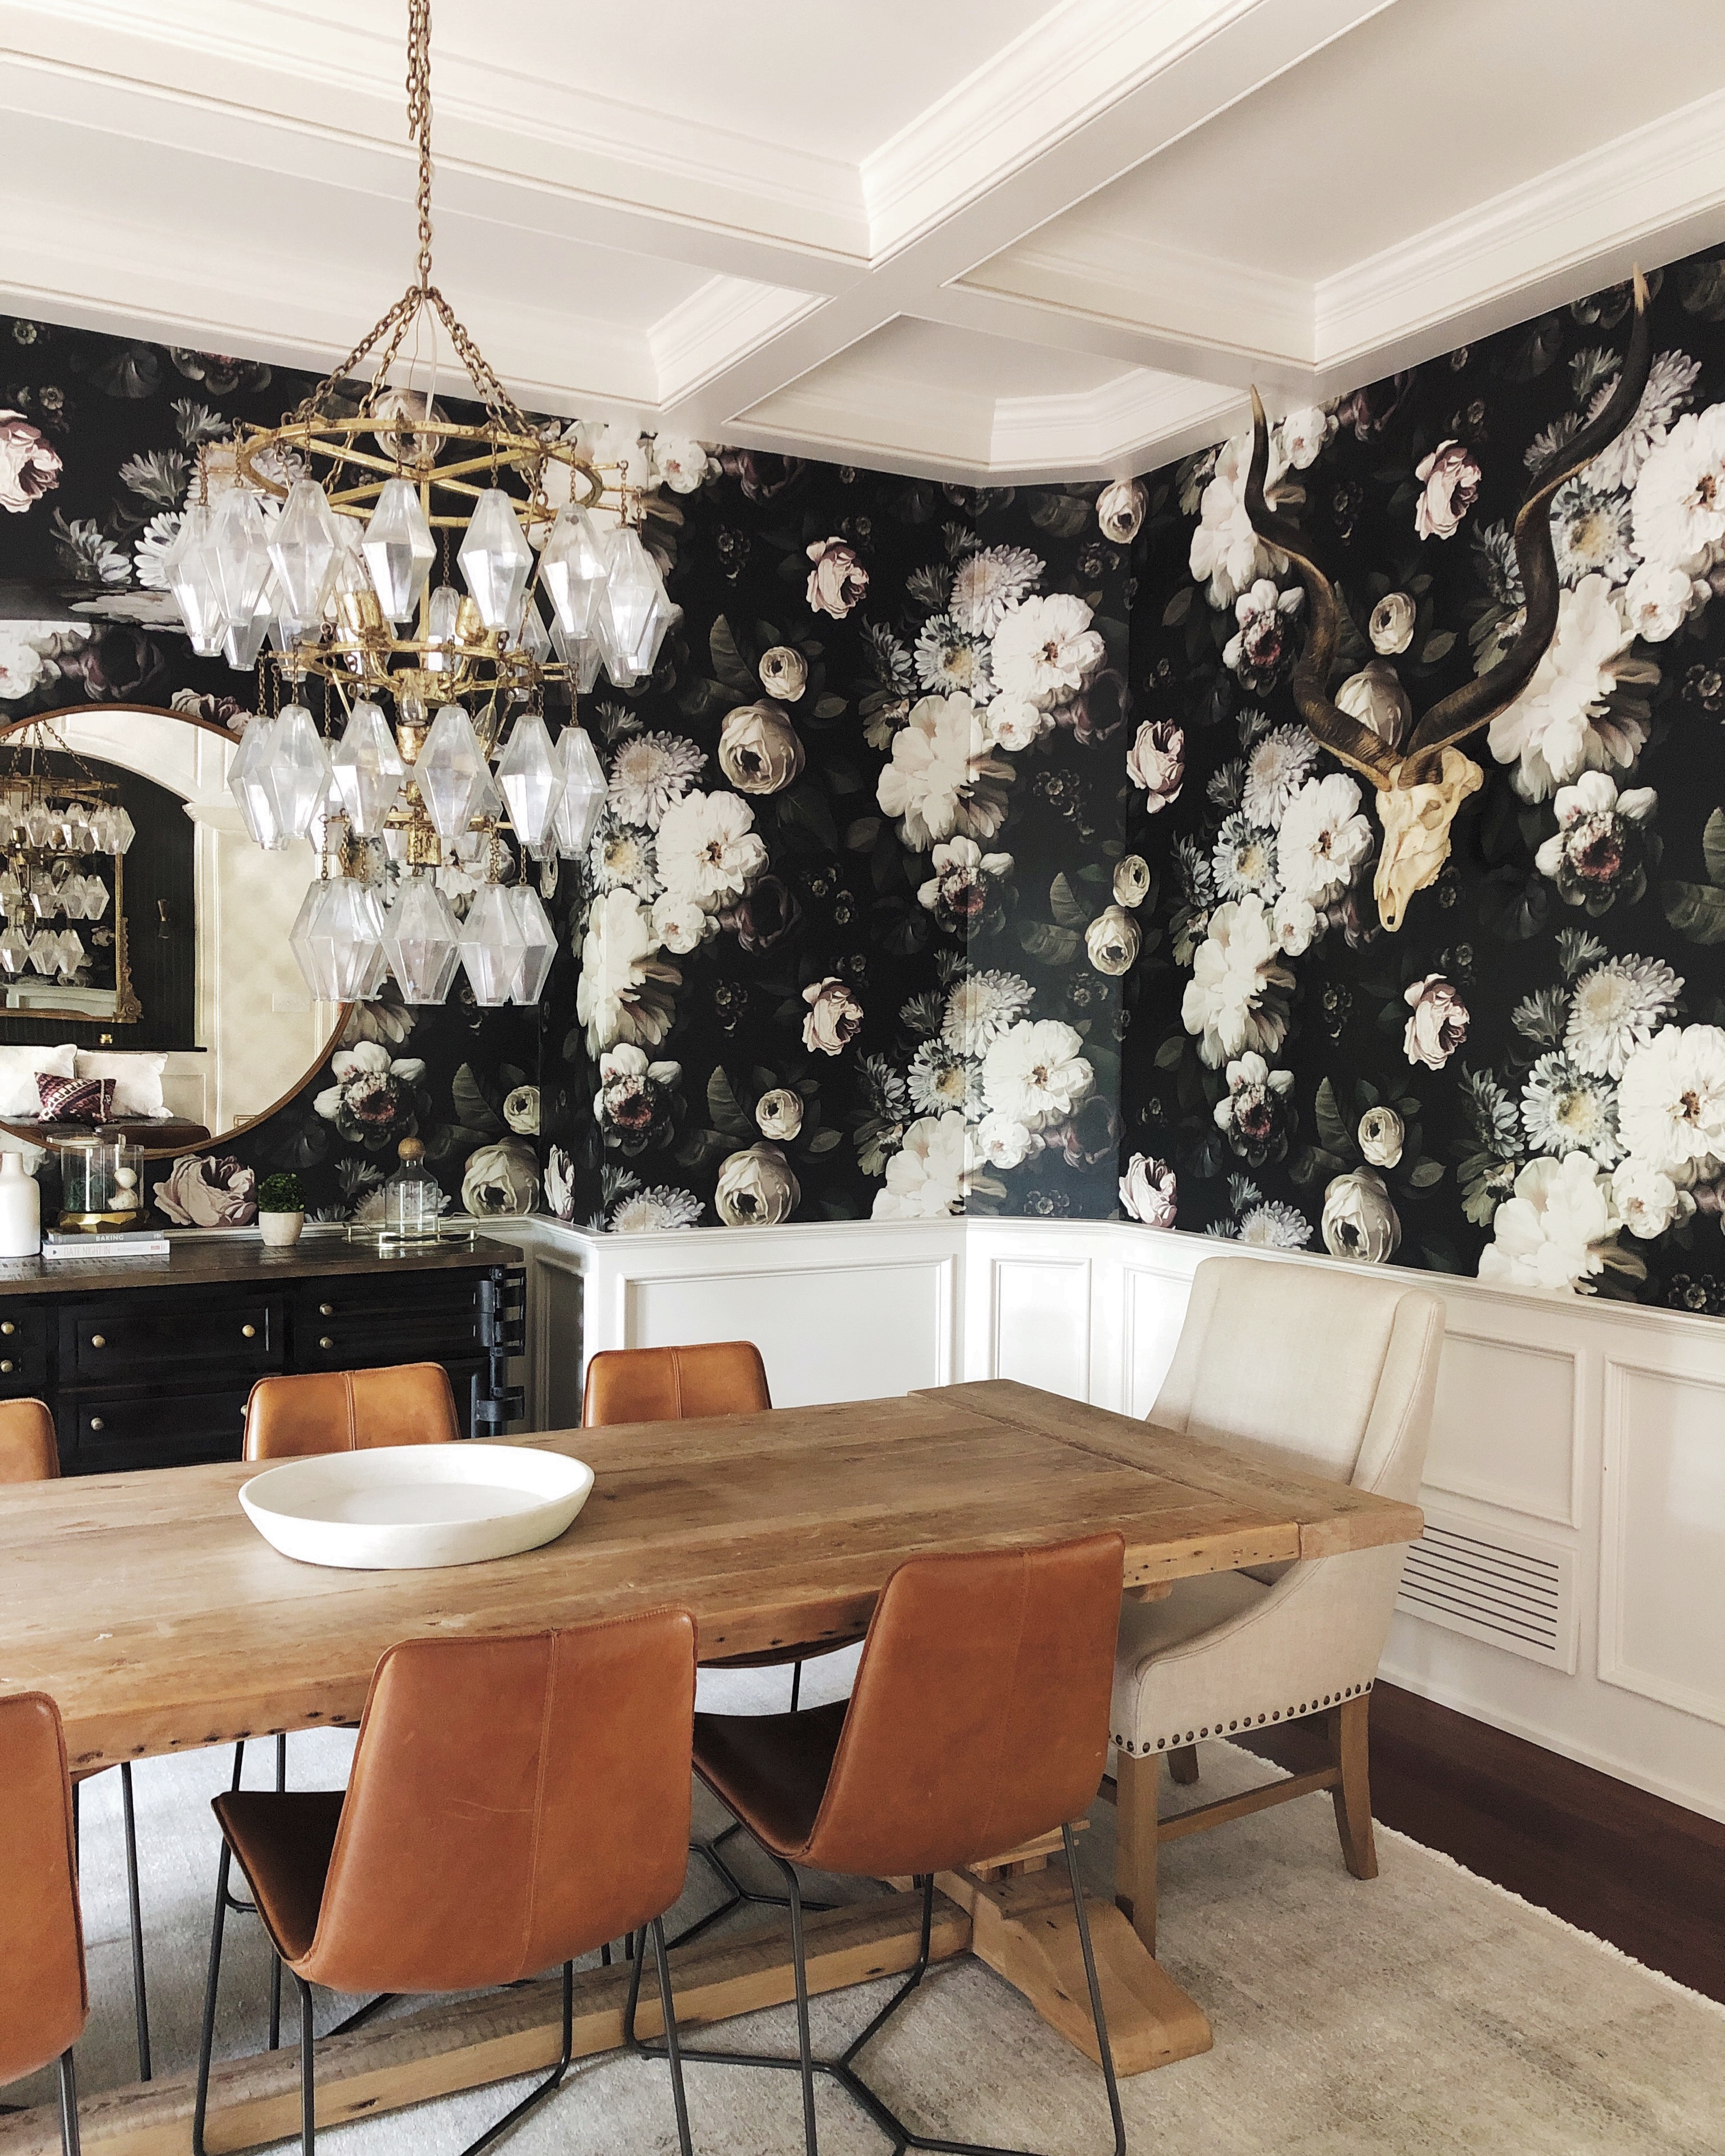 Bold Floral Wallpaper Is Back BIG TIME But With A Very 2020 Makeover   Emily Henderson